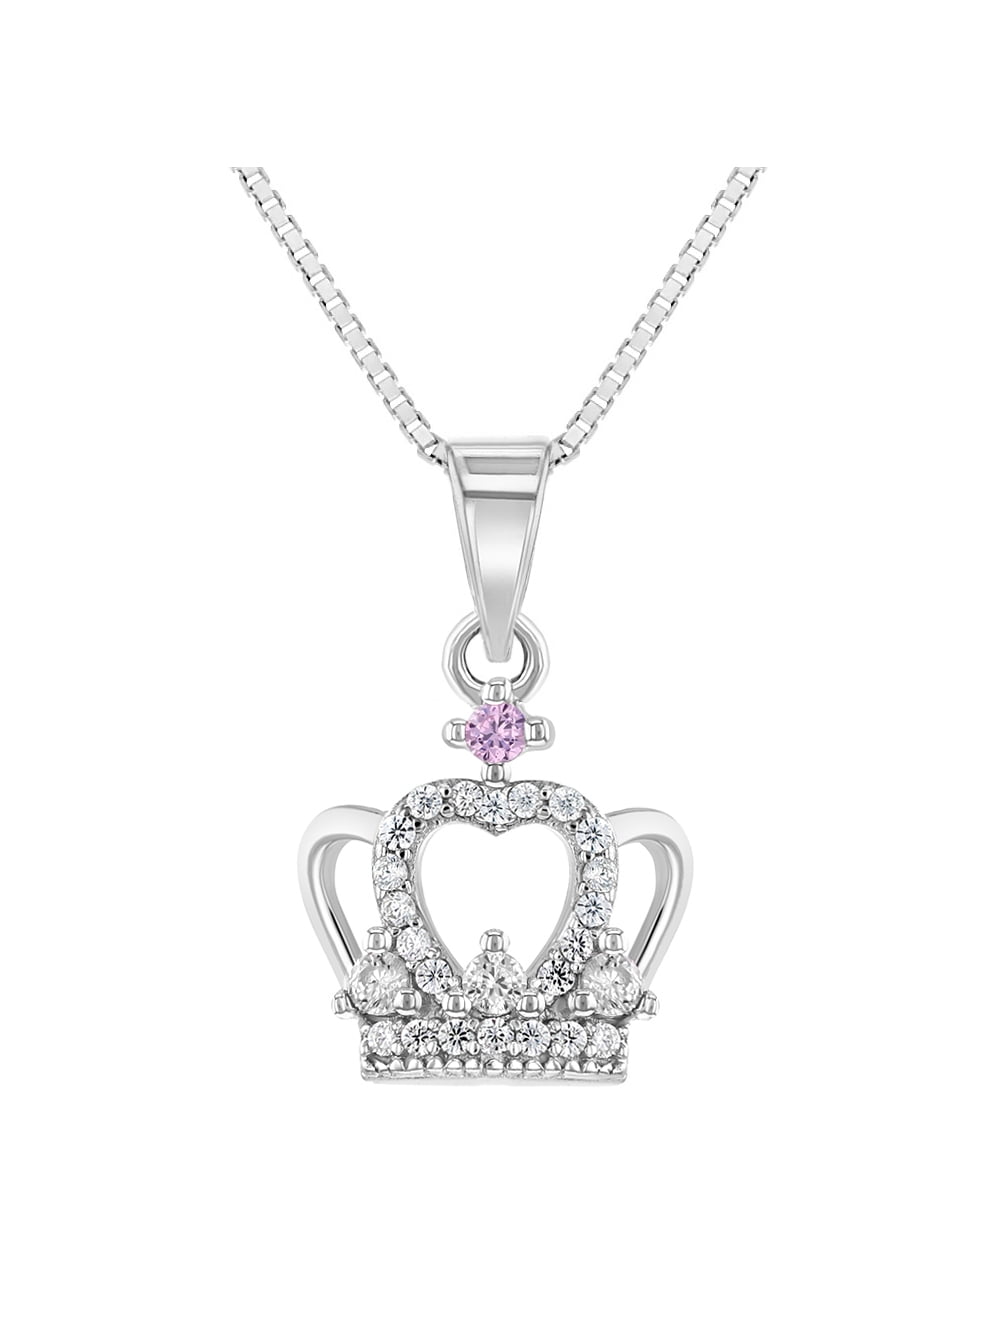 New 925 Sterling Silver Ice Clear CZ White Zirconia Bling Crown Pendant Necklace